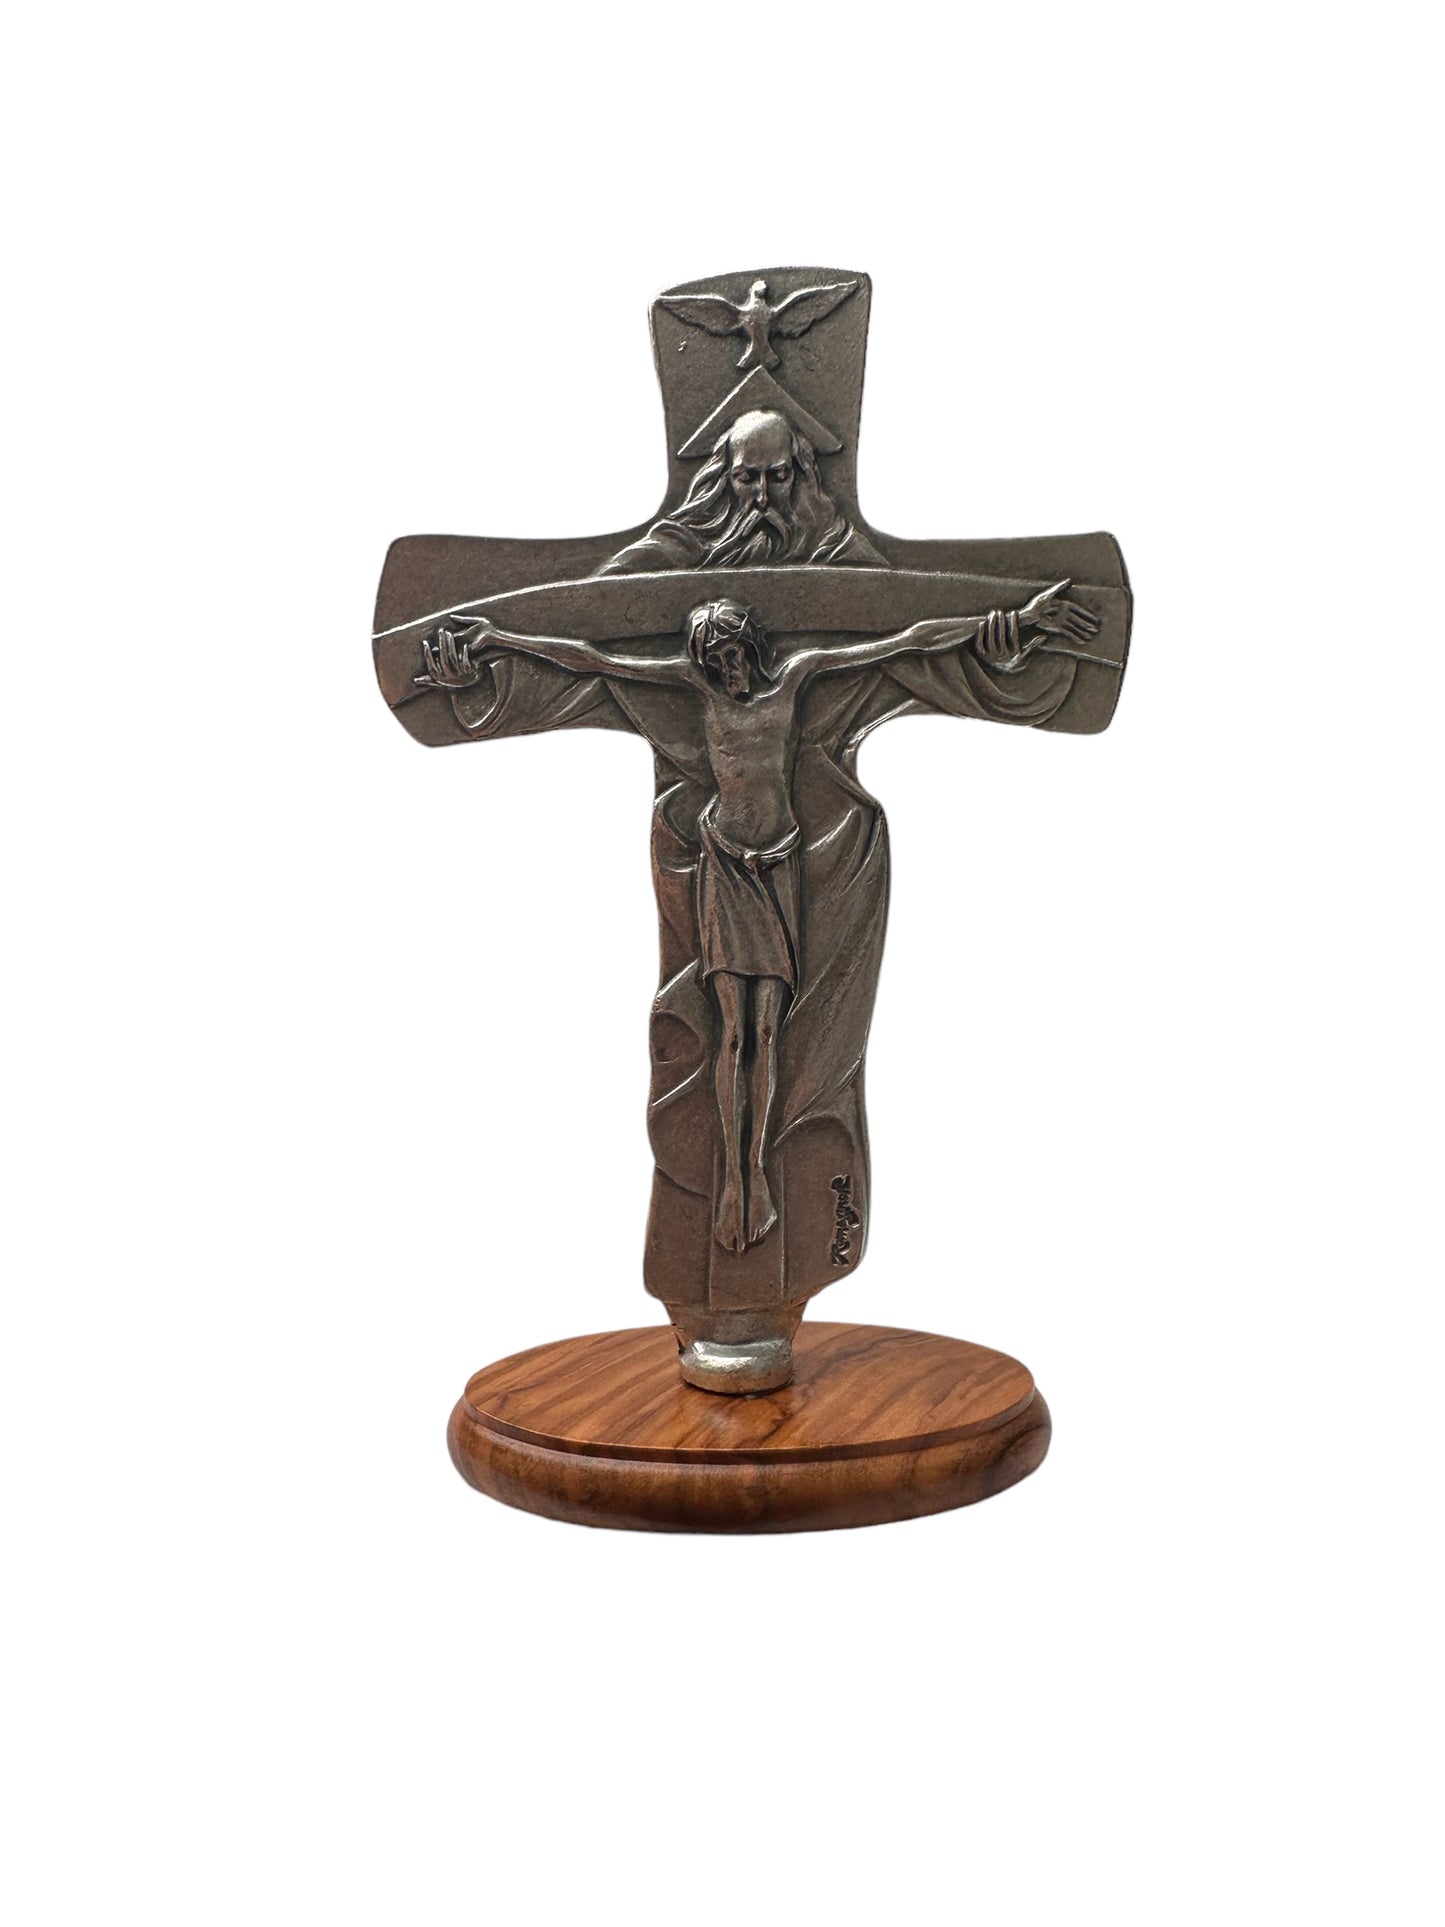 Metal Cross of the Holy Trinity + base, size 6.1 x 3.5 inches